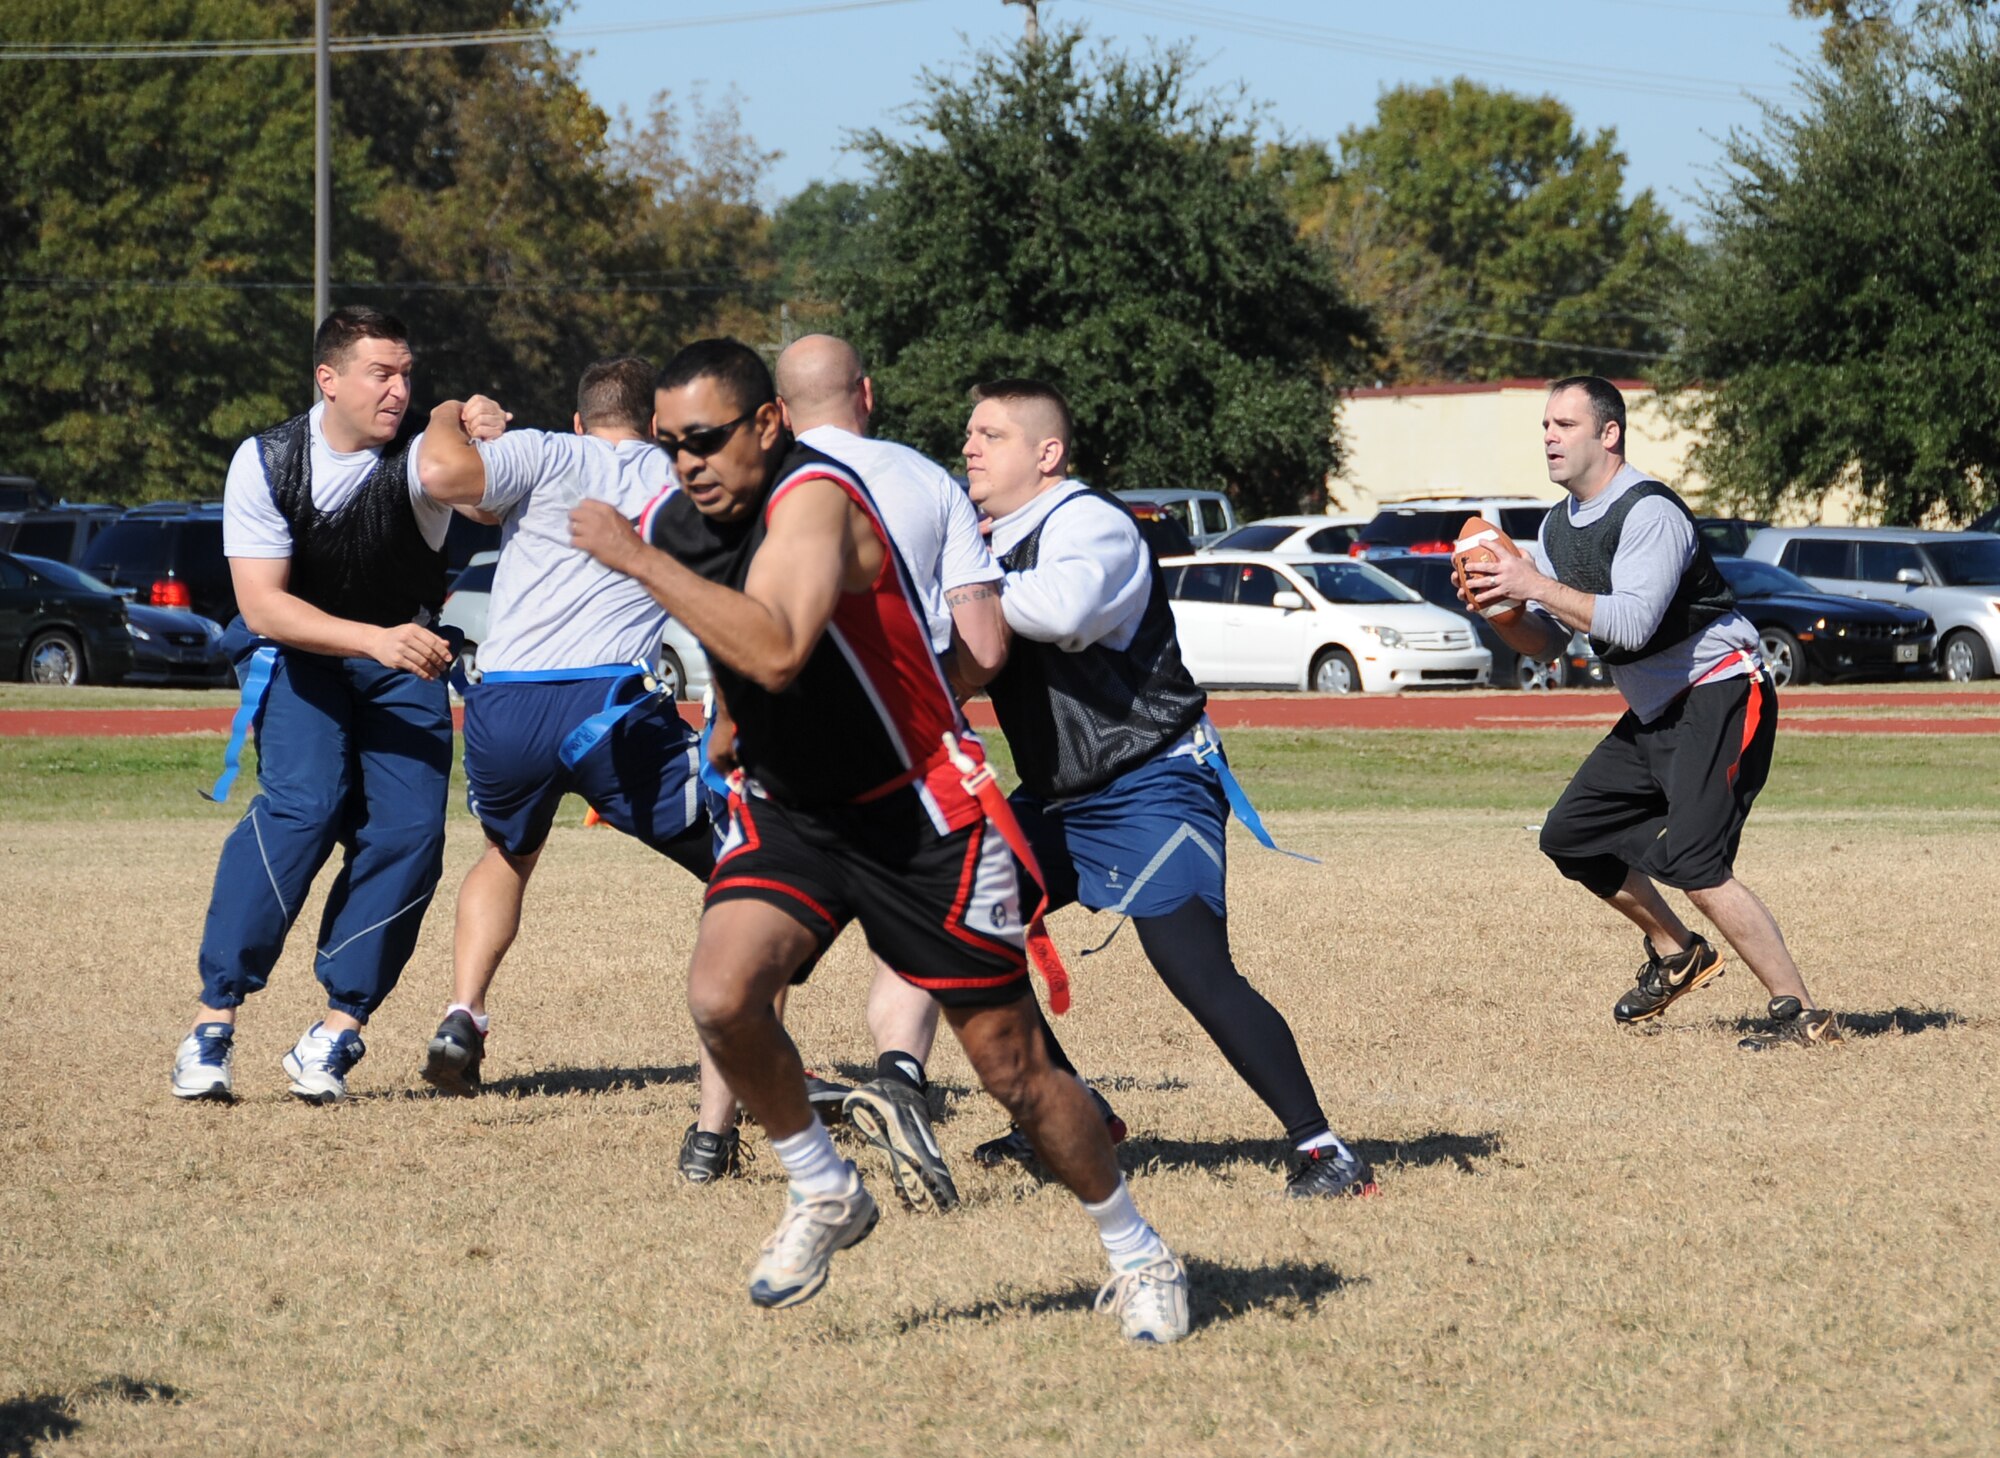 Barksdale Airmen participate in a flag football game during the 2012 Sports Day on Barksdale Air Force Base, La., Nov. 16. Sports Day gave Airmen the opportunity to compete against other squadrons in friendly competition to build teamwork and increase the awareness of fitness. (U.S. Air Force photo/Airman 1st Class Benjamin Gonsier)(RELEASED)